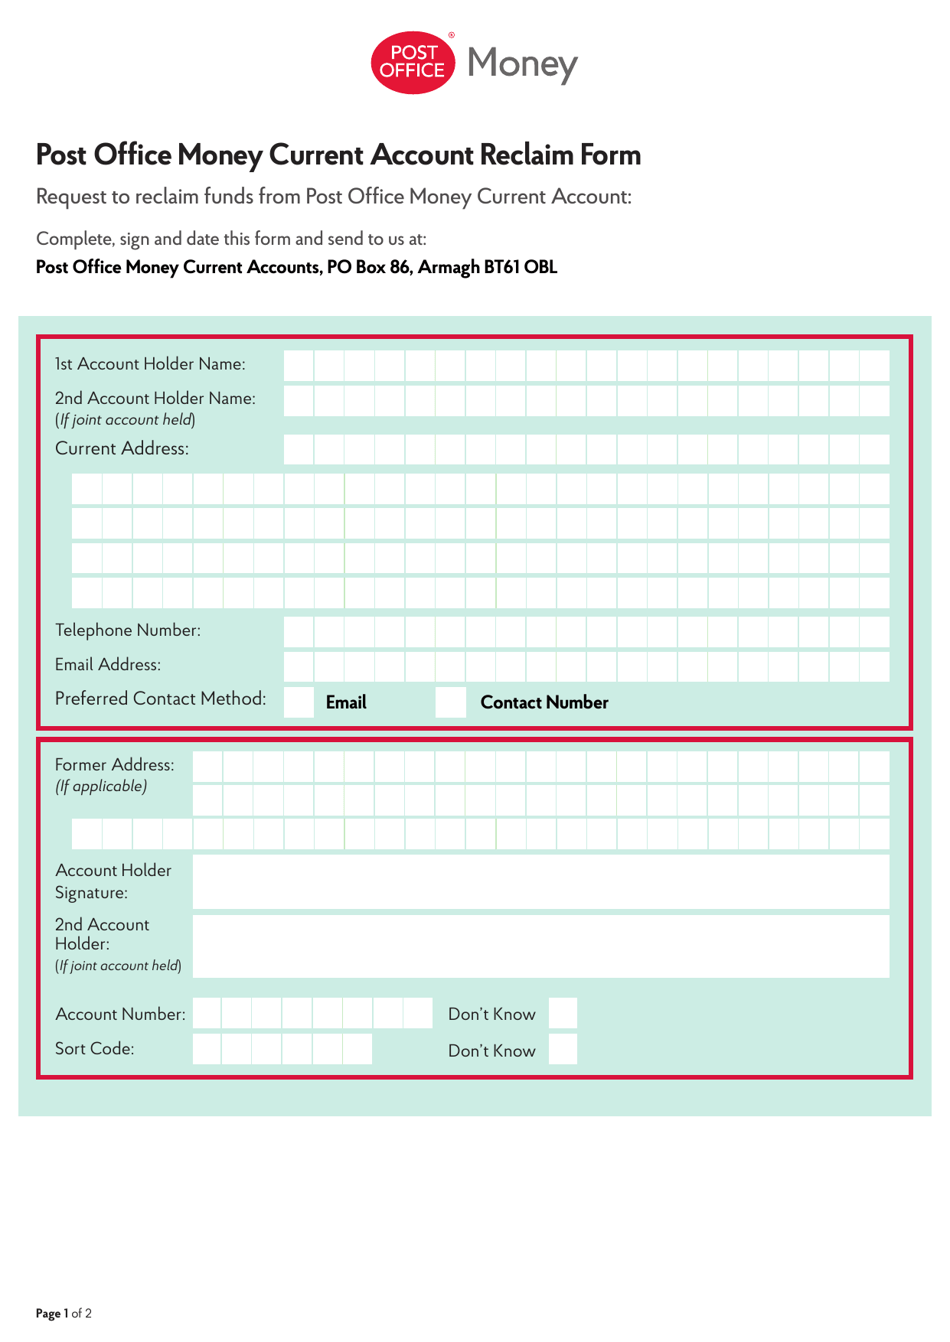 Post Office Money Current Account Reclaim Form - United Kingdom, Page 1